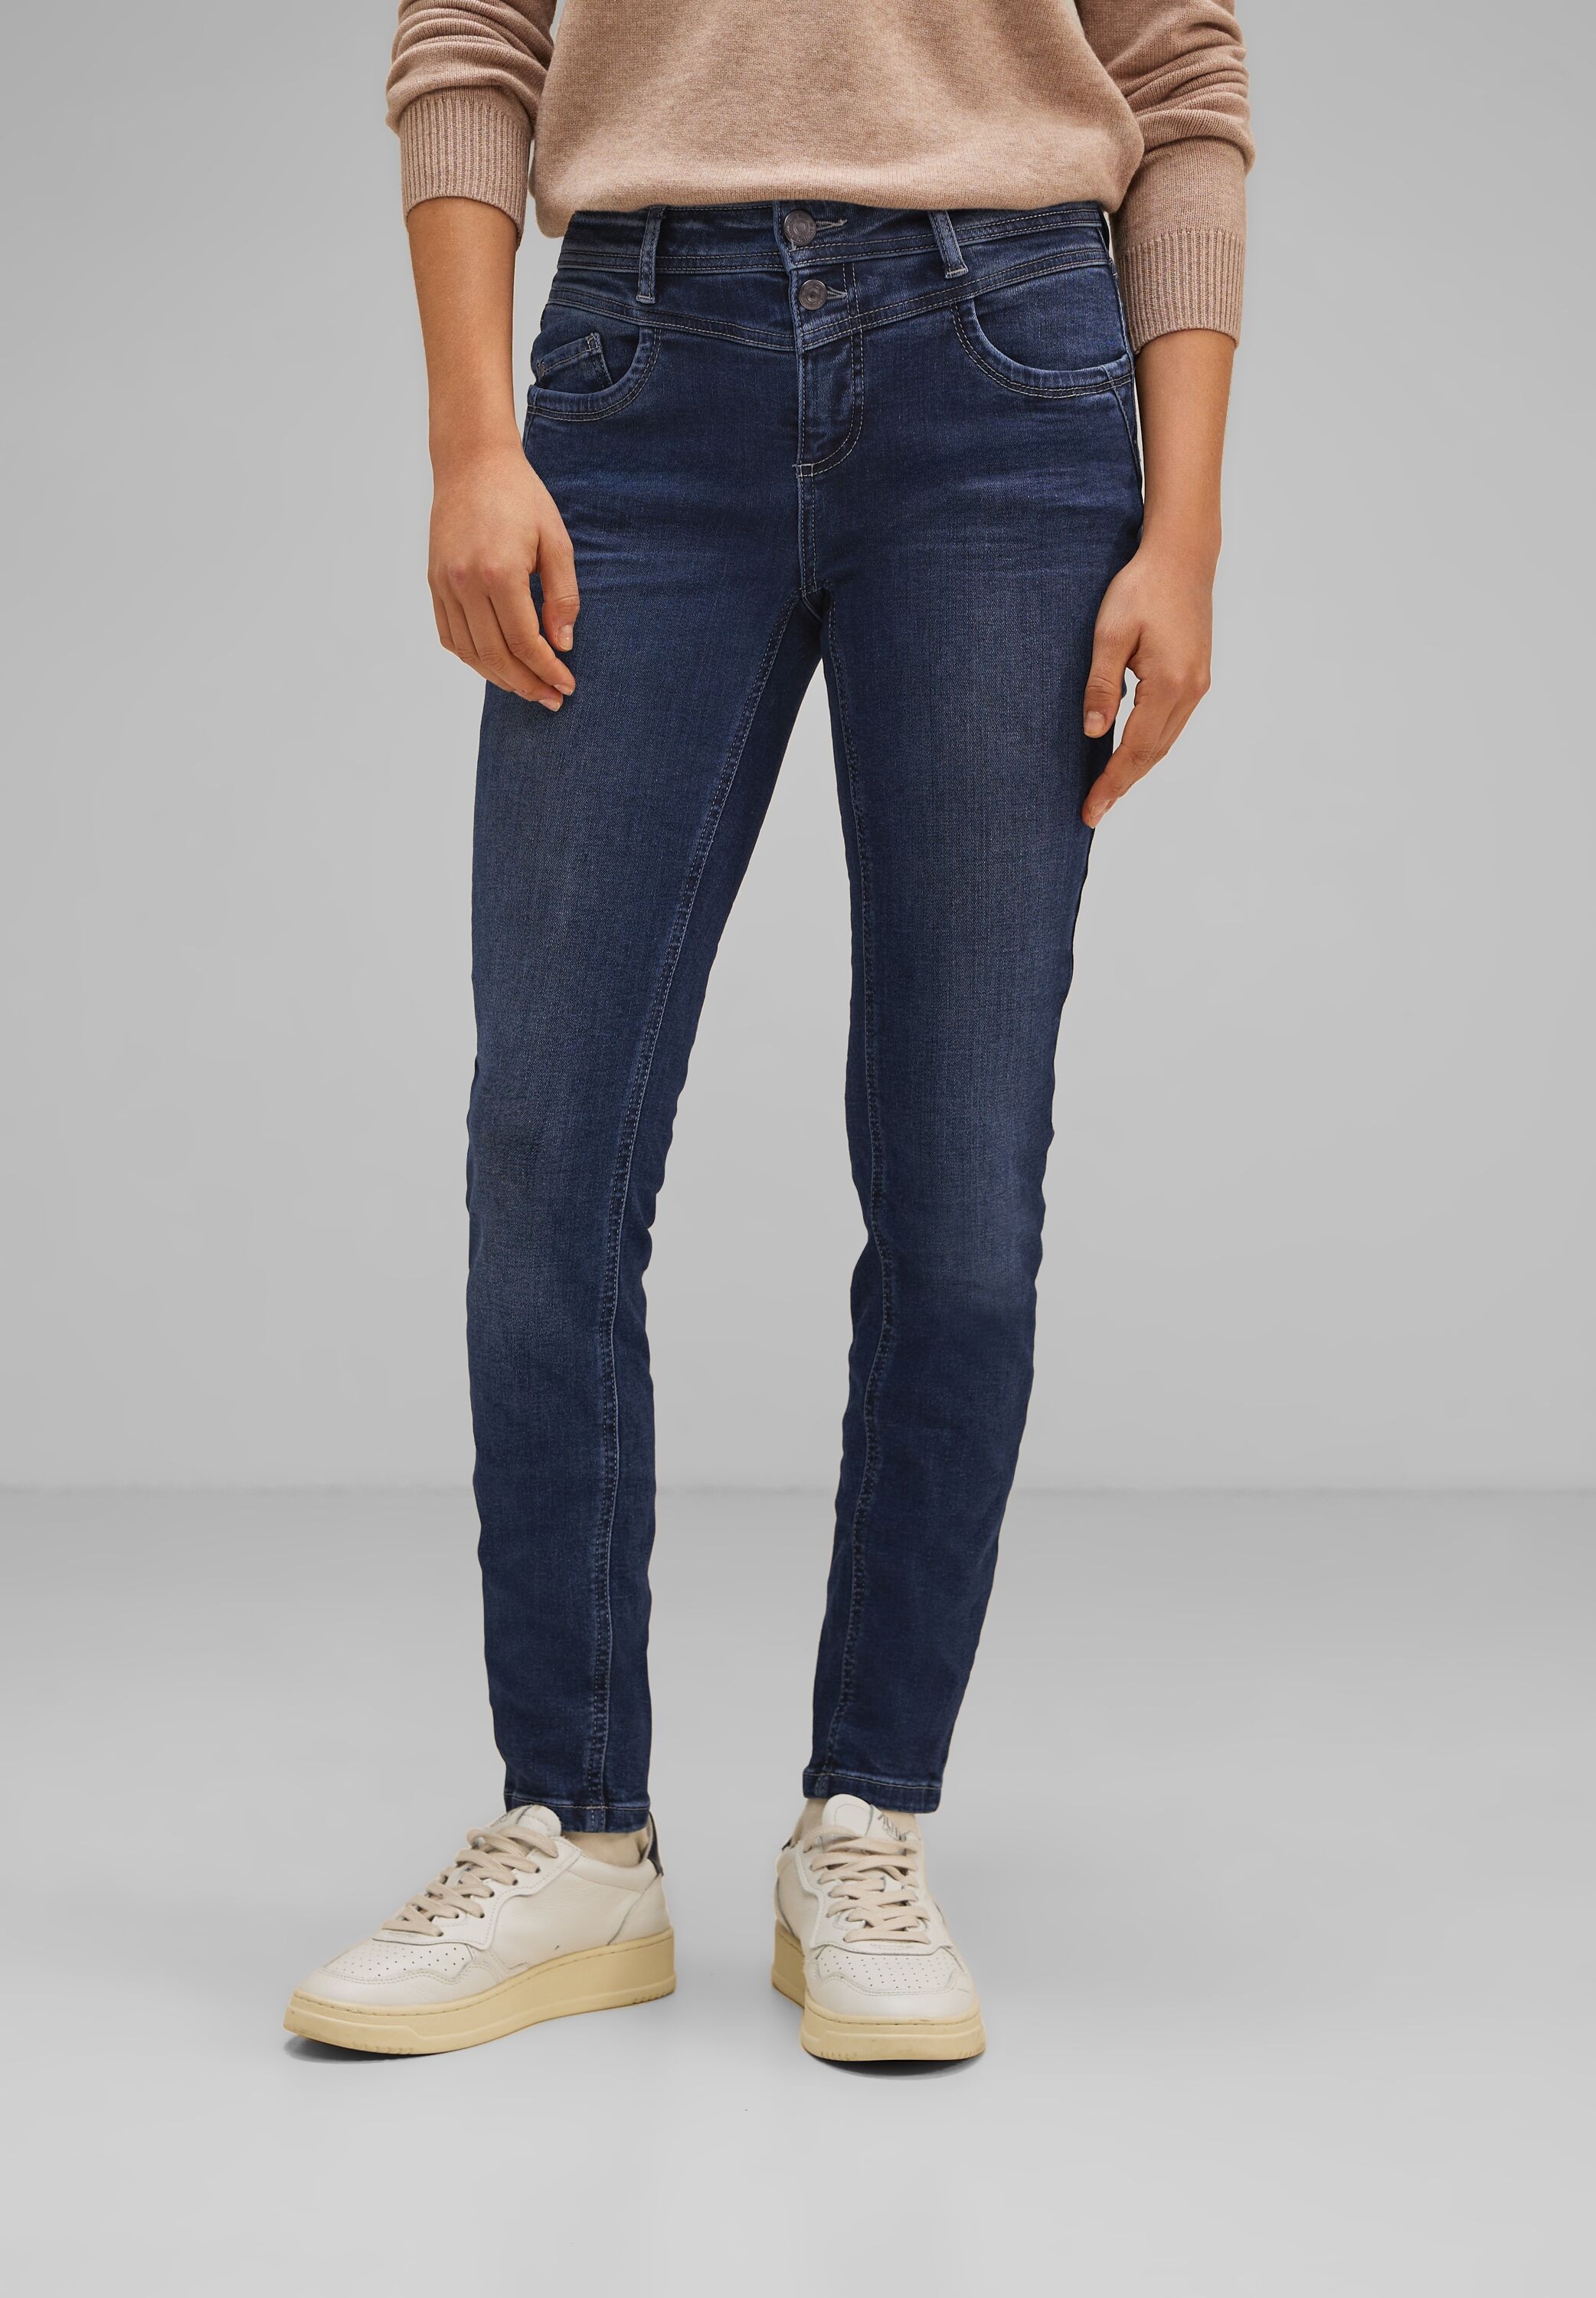 STREET ONE Slim-fit-Jeans, softer Materialmix online kaufen | I'm walking